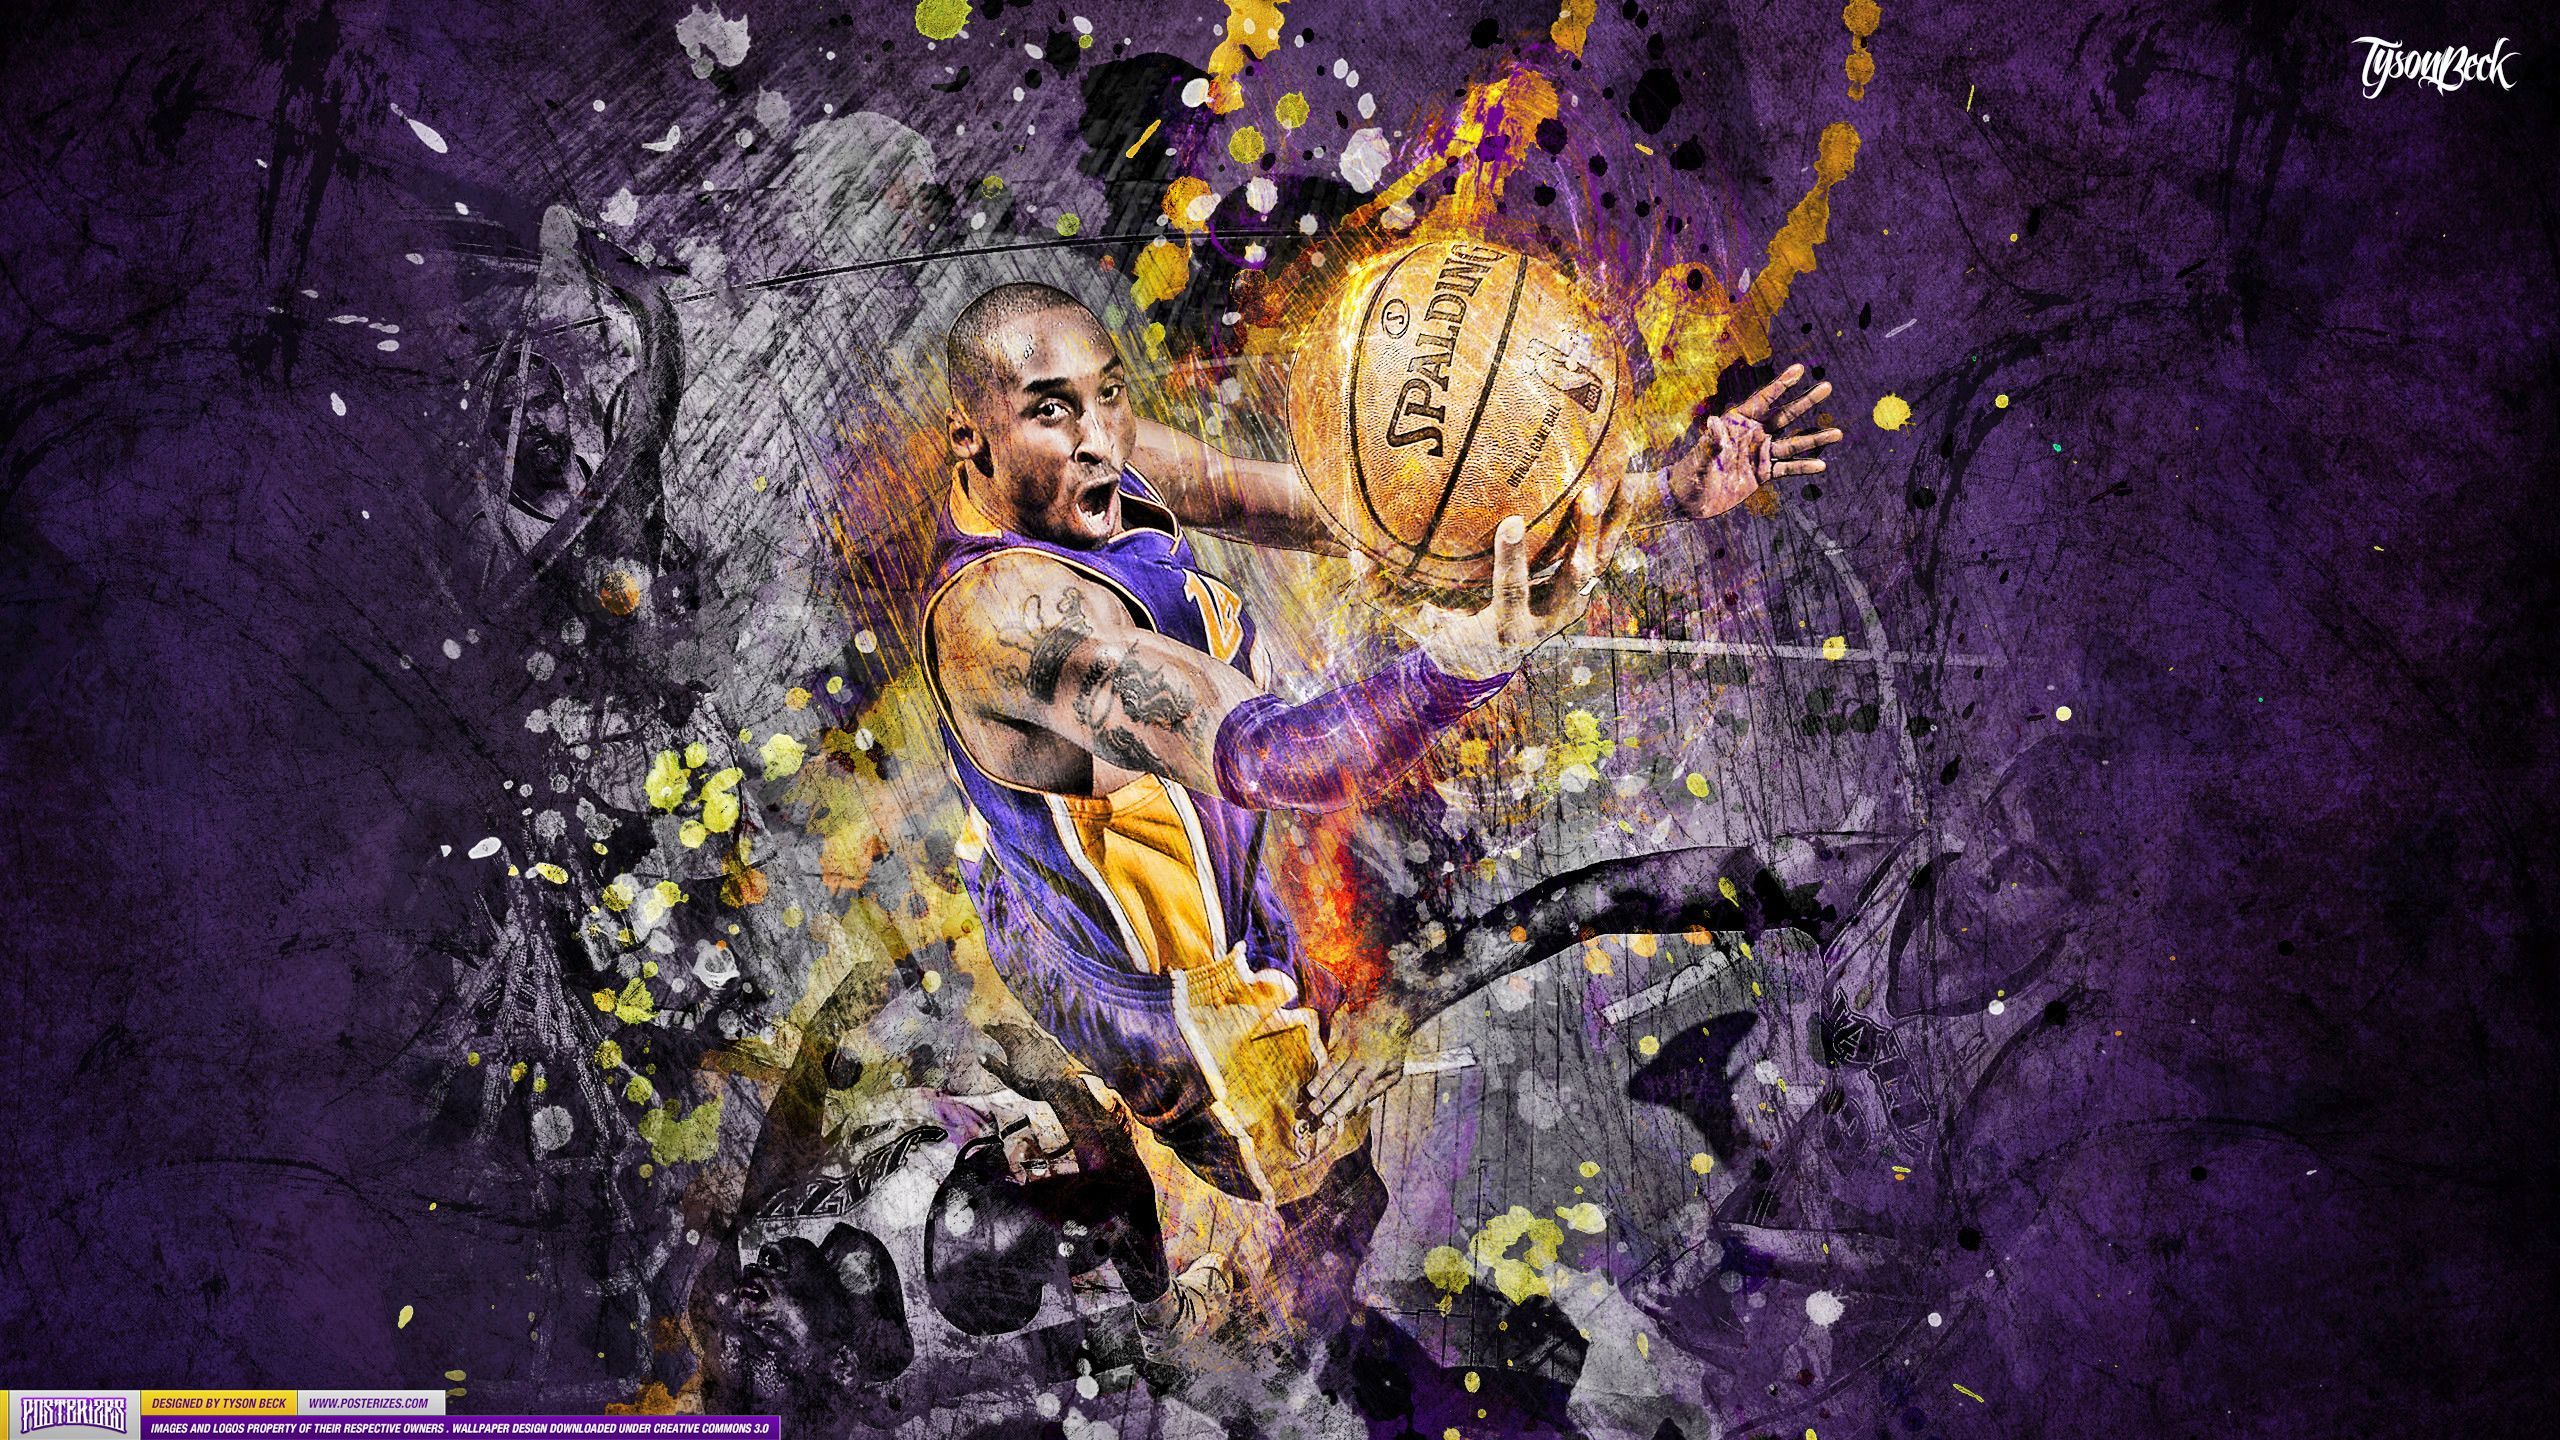 Lakers Wallpapers Archives - Page 2 of 3 - Wallpaper